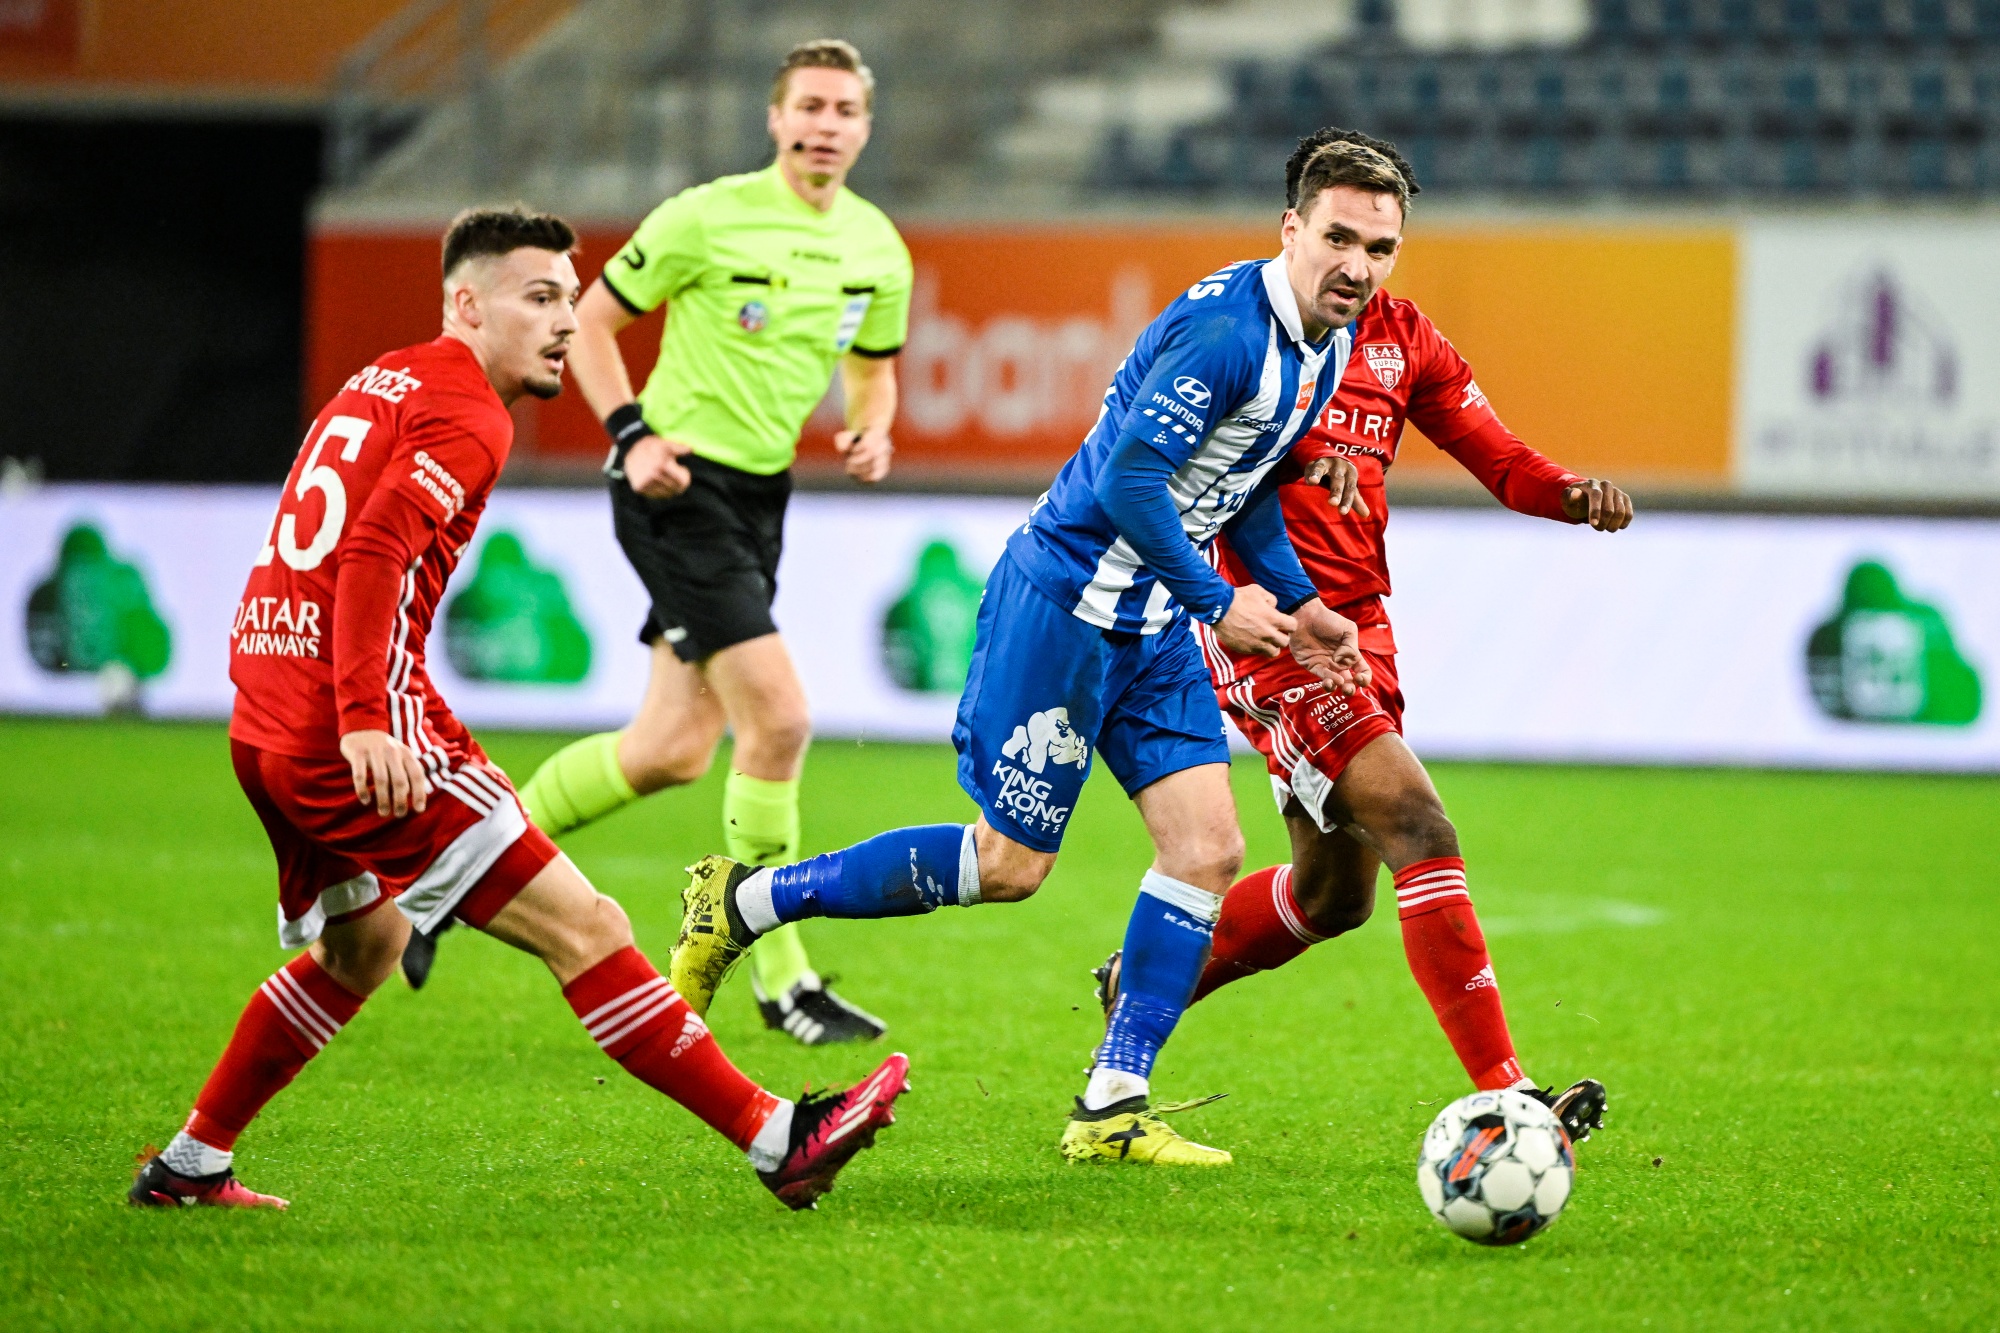 Eupen's Boris Lambert and Gent's Sven Kums pictured in action during a soccer match between KAA Gent and KAS Eupen, Sunday 19 March 2023 in Gent, on day 30 of the 2022-2023 'Jupiler Pro League' first division of the Belgian championship. BELGA PHOTO TOM GOYVAERTS